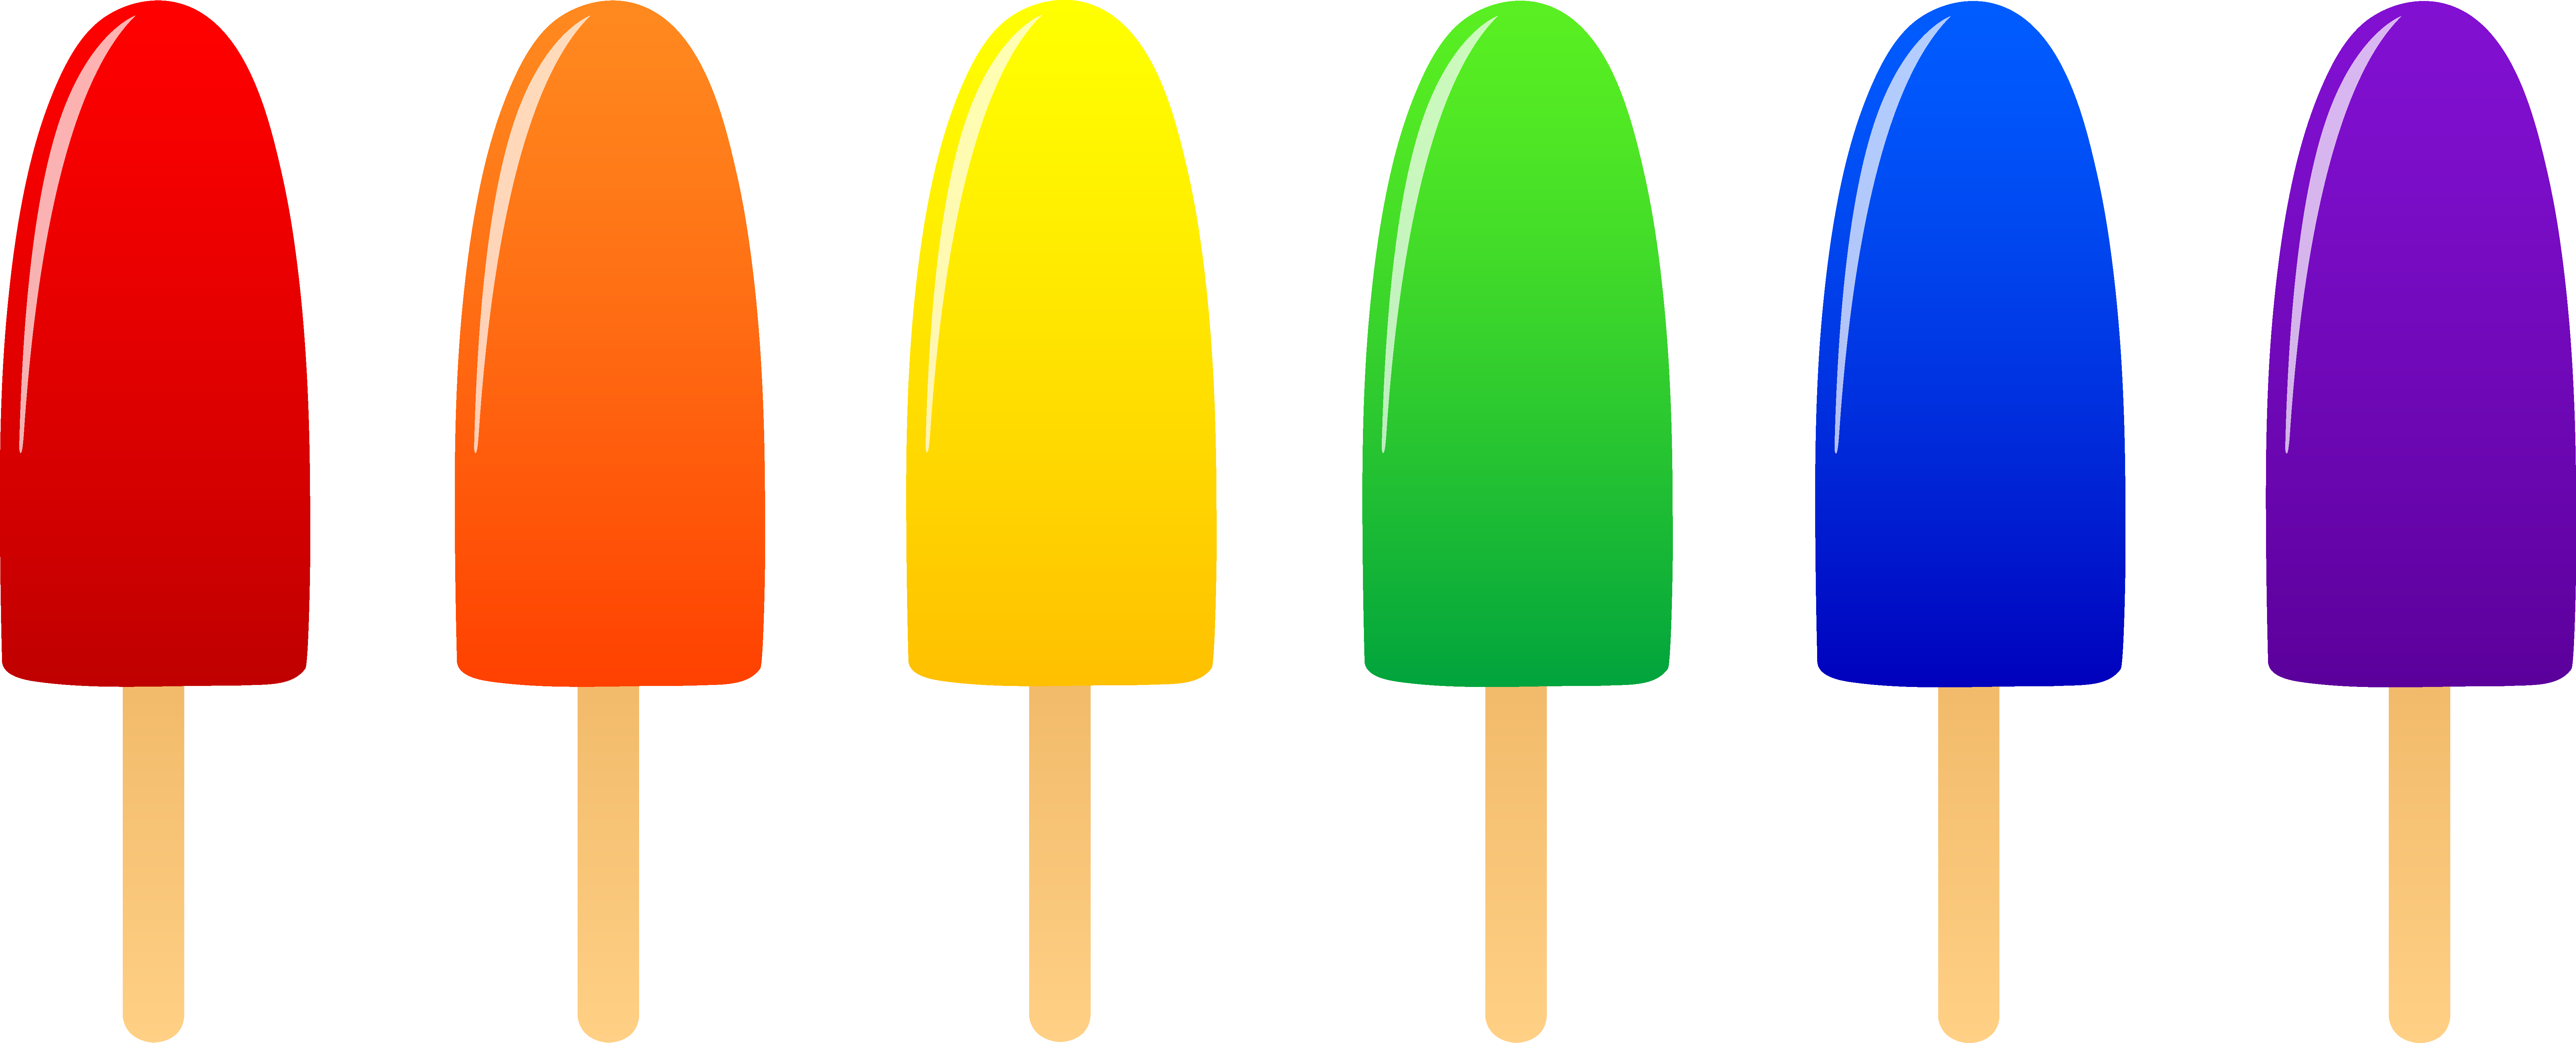 Clip Arts Related To : ice cream candy clipart. 